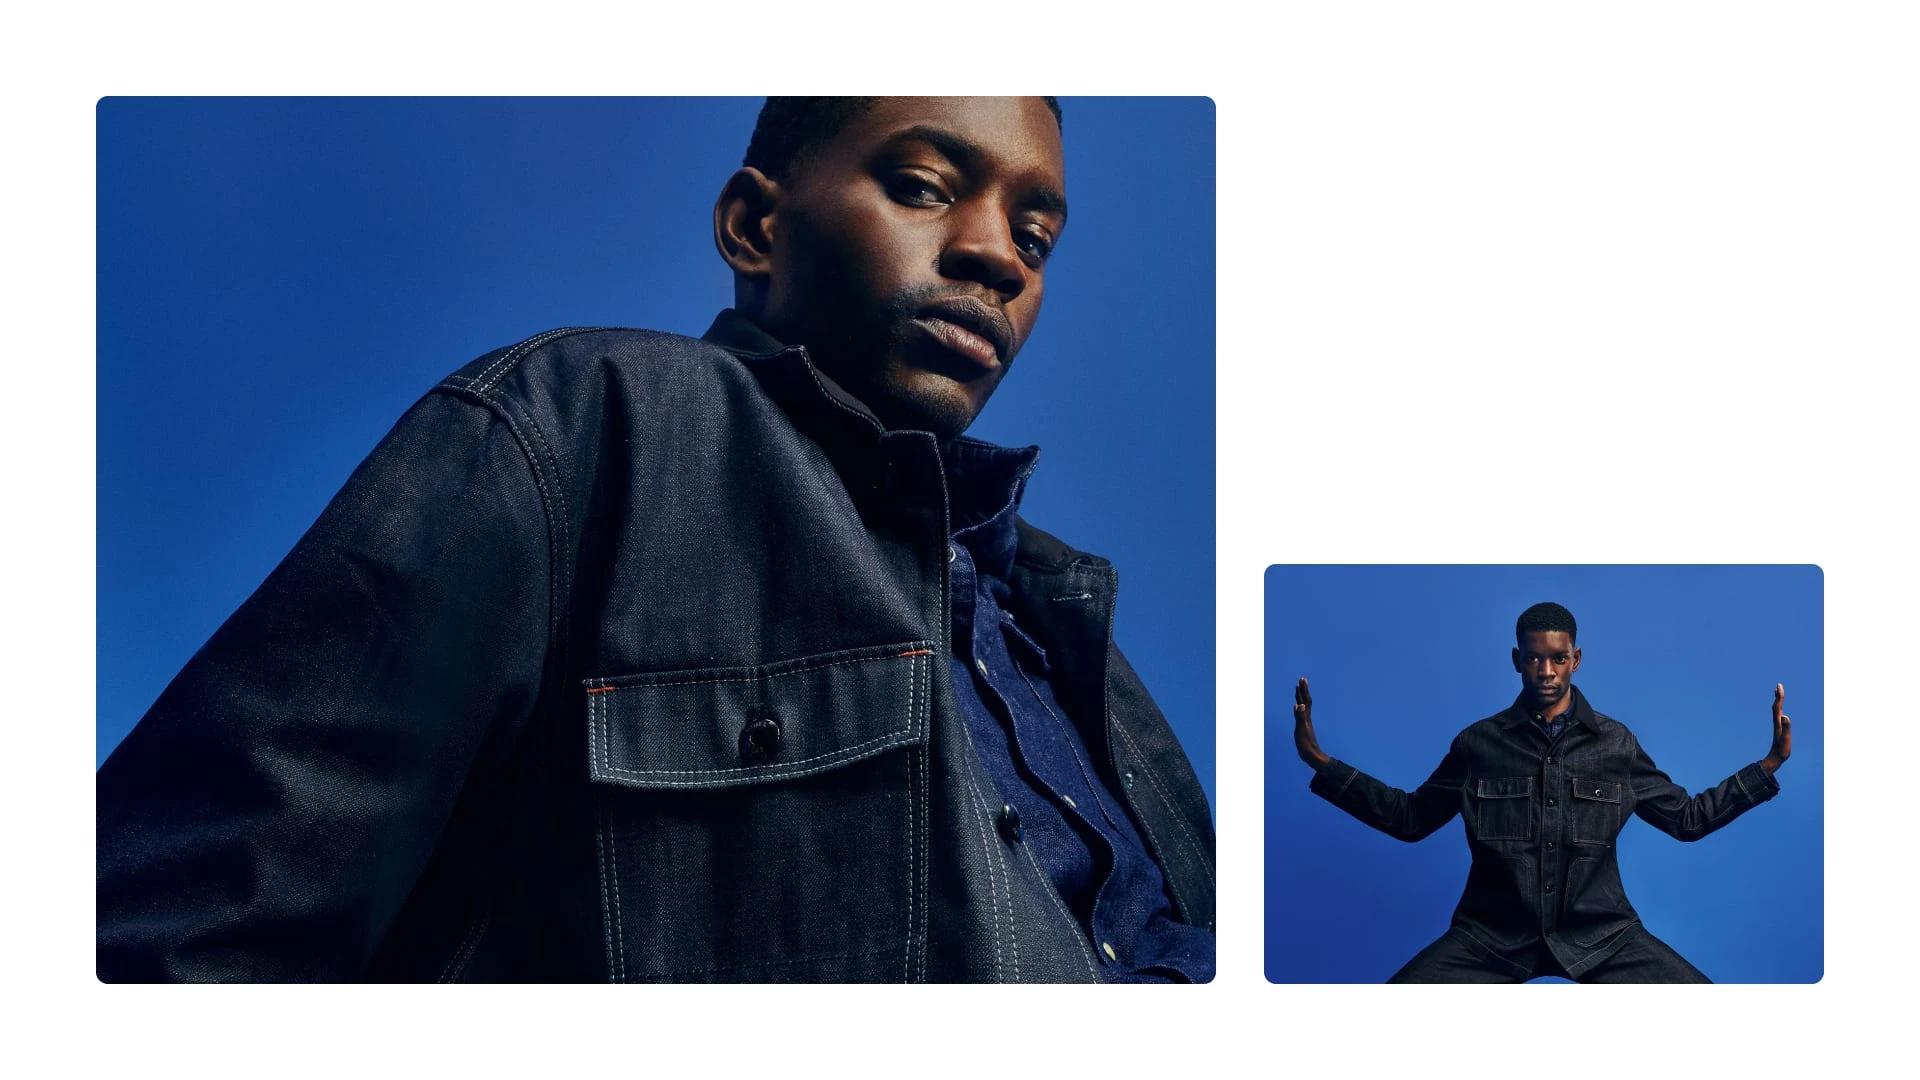 Two photos of models wearing G-Star RAW's denim